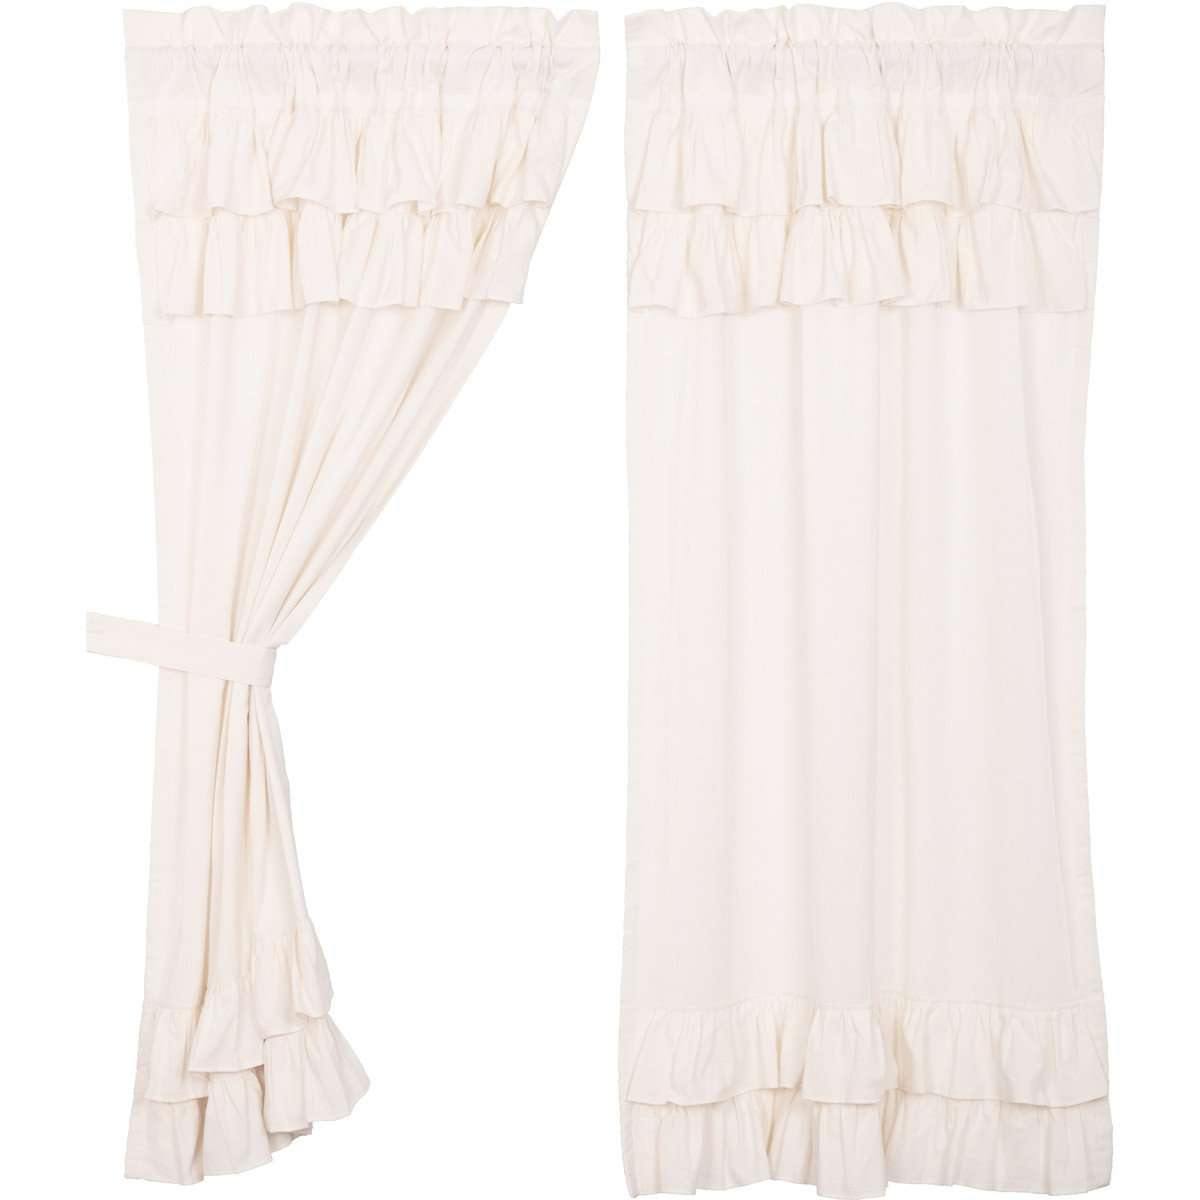 Simple Life Flax Antique White Ruffled Short Panel Curtain Set of 2 63x36 VHC Brands - The Fox Decor